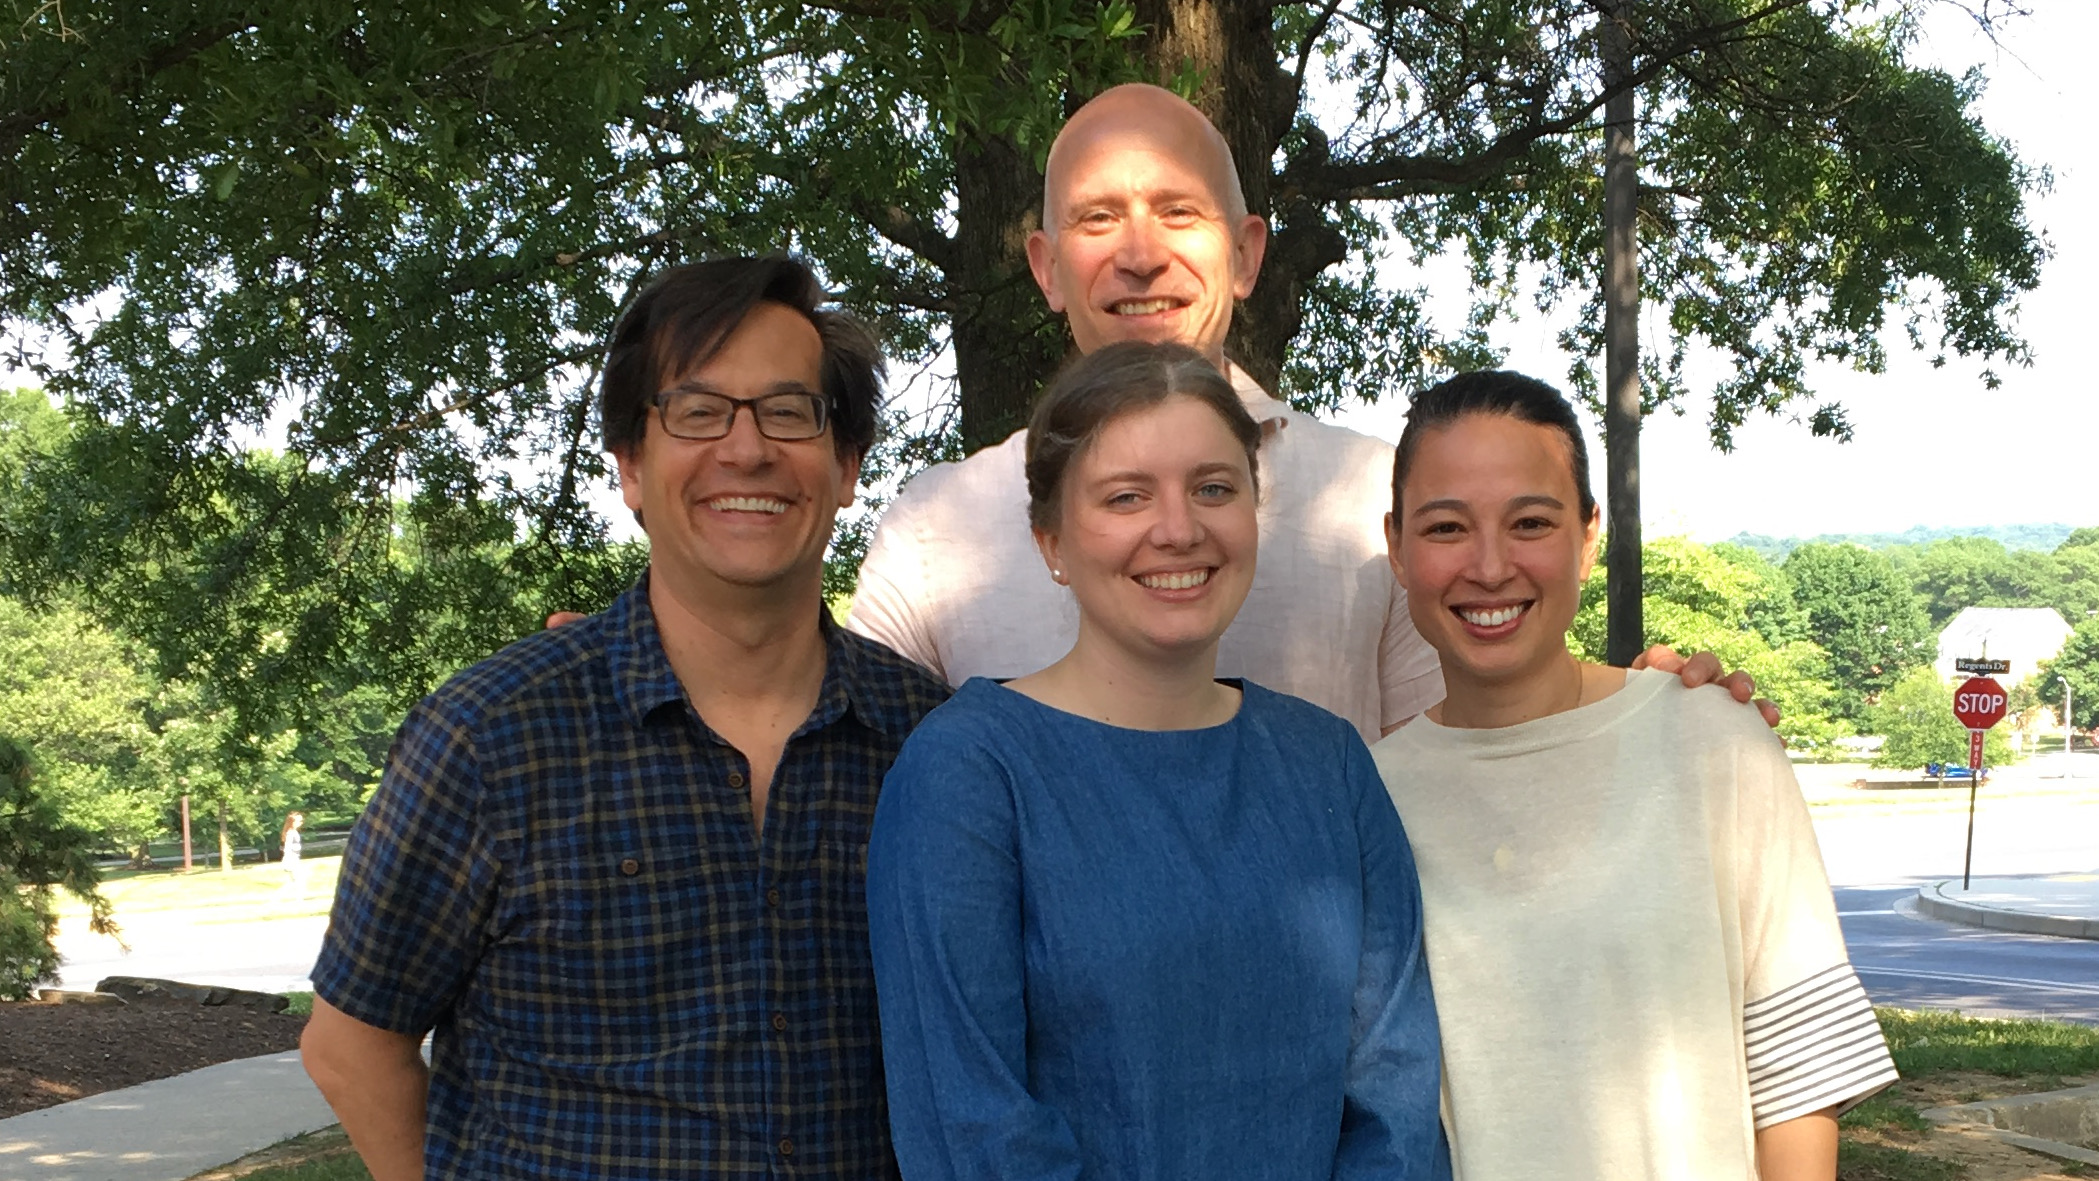 PhD student Rachel Dudley, flanked by her three PhD advisors, standing outside in the sun, smiling after a successful PhD defense.